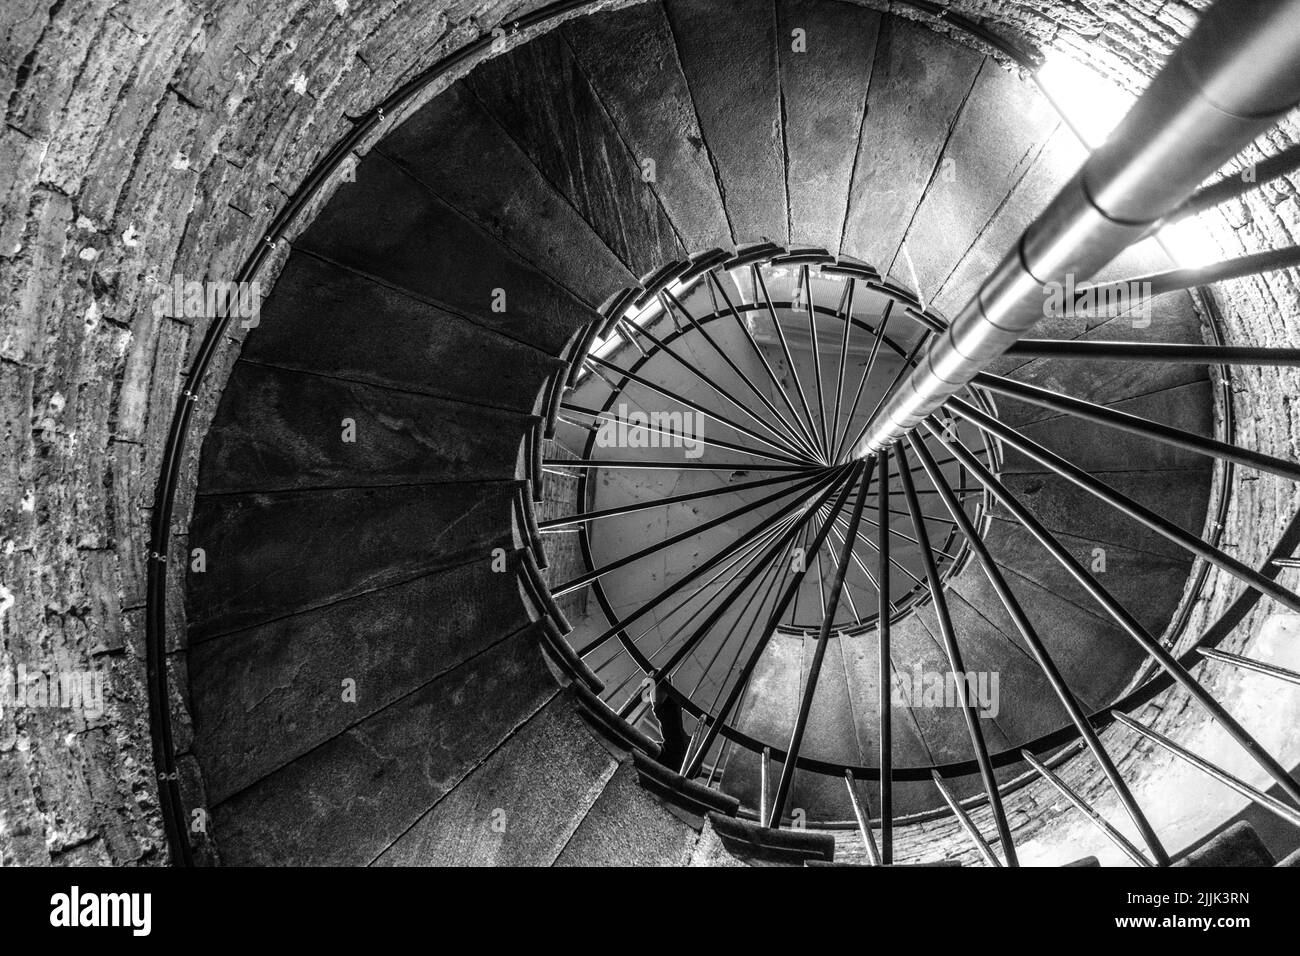 Spiral stairs of the Saint Issac Cathedral in Russia, Saint Petersburg. Stock Photo